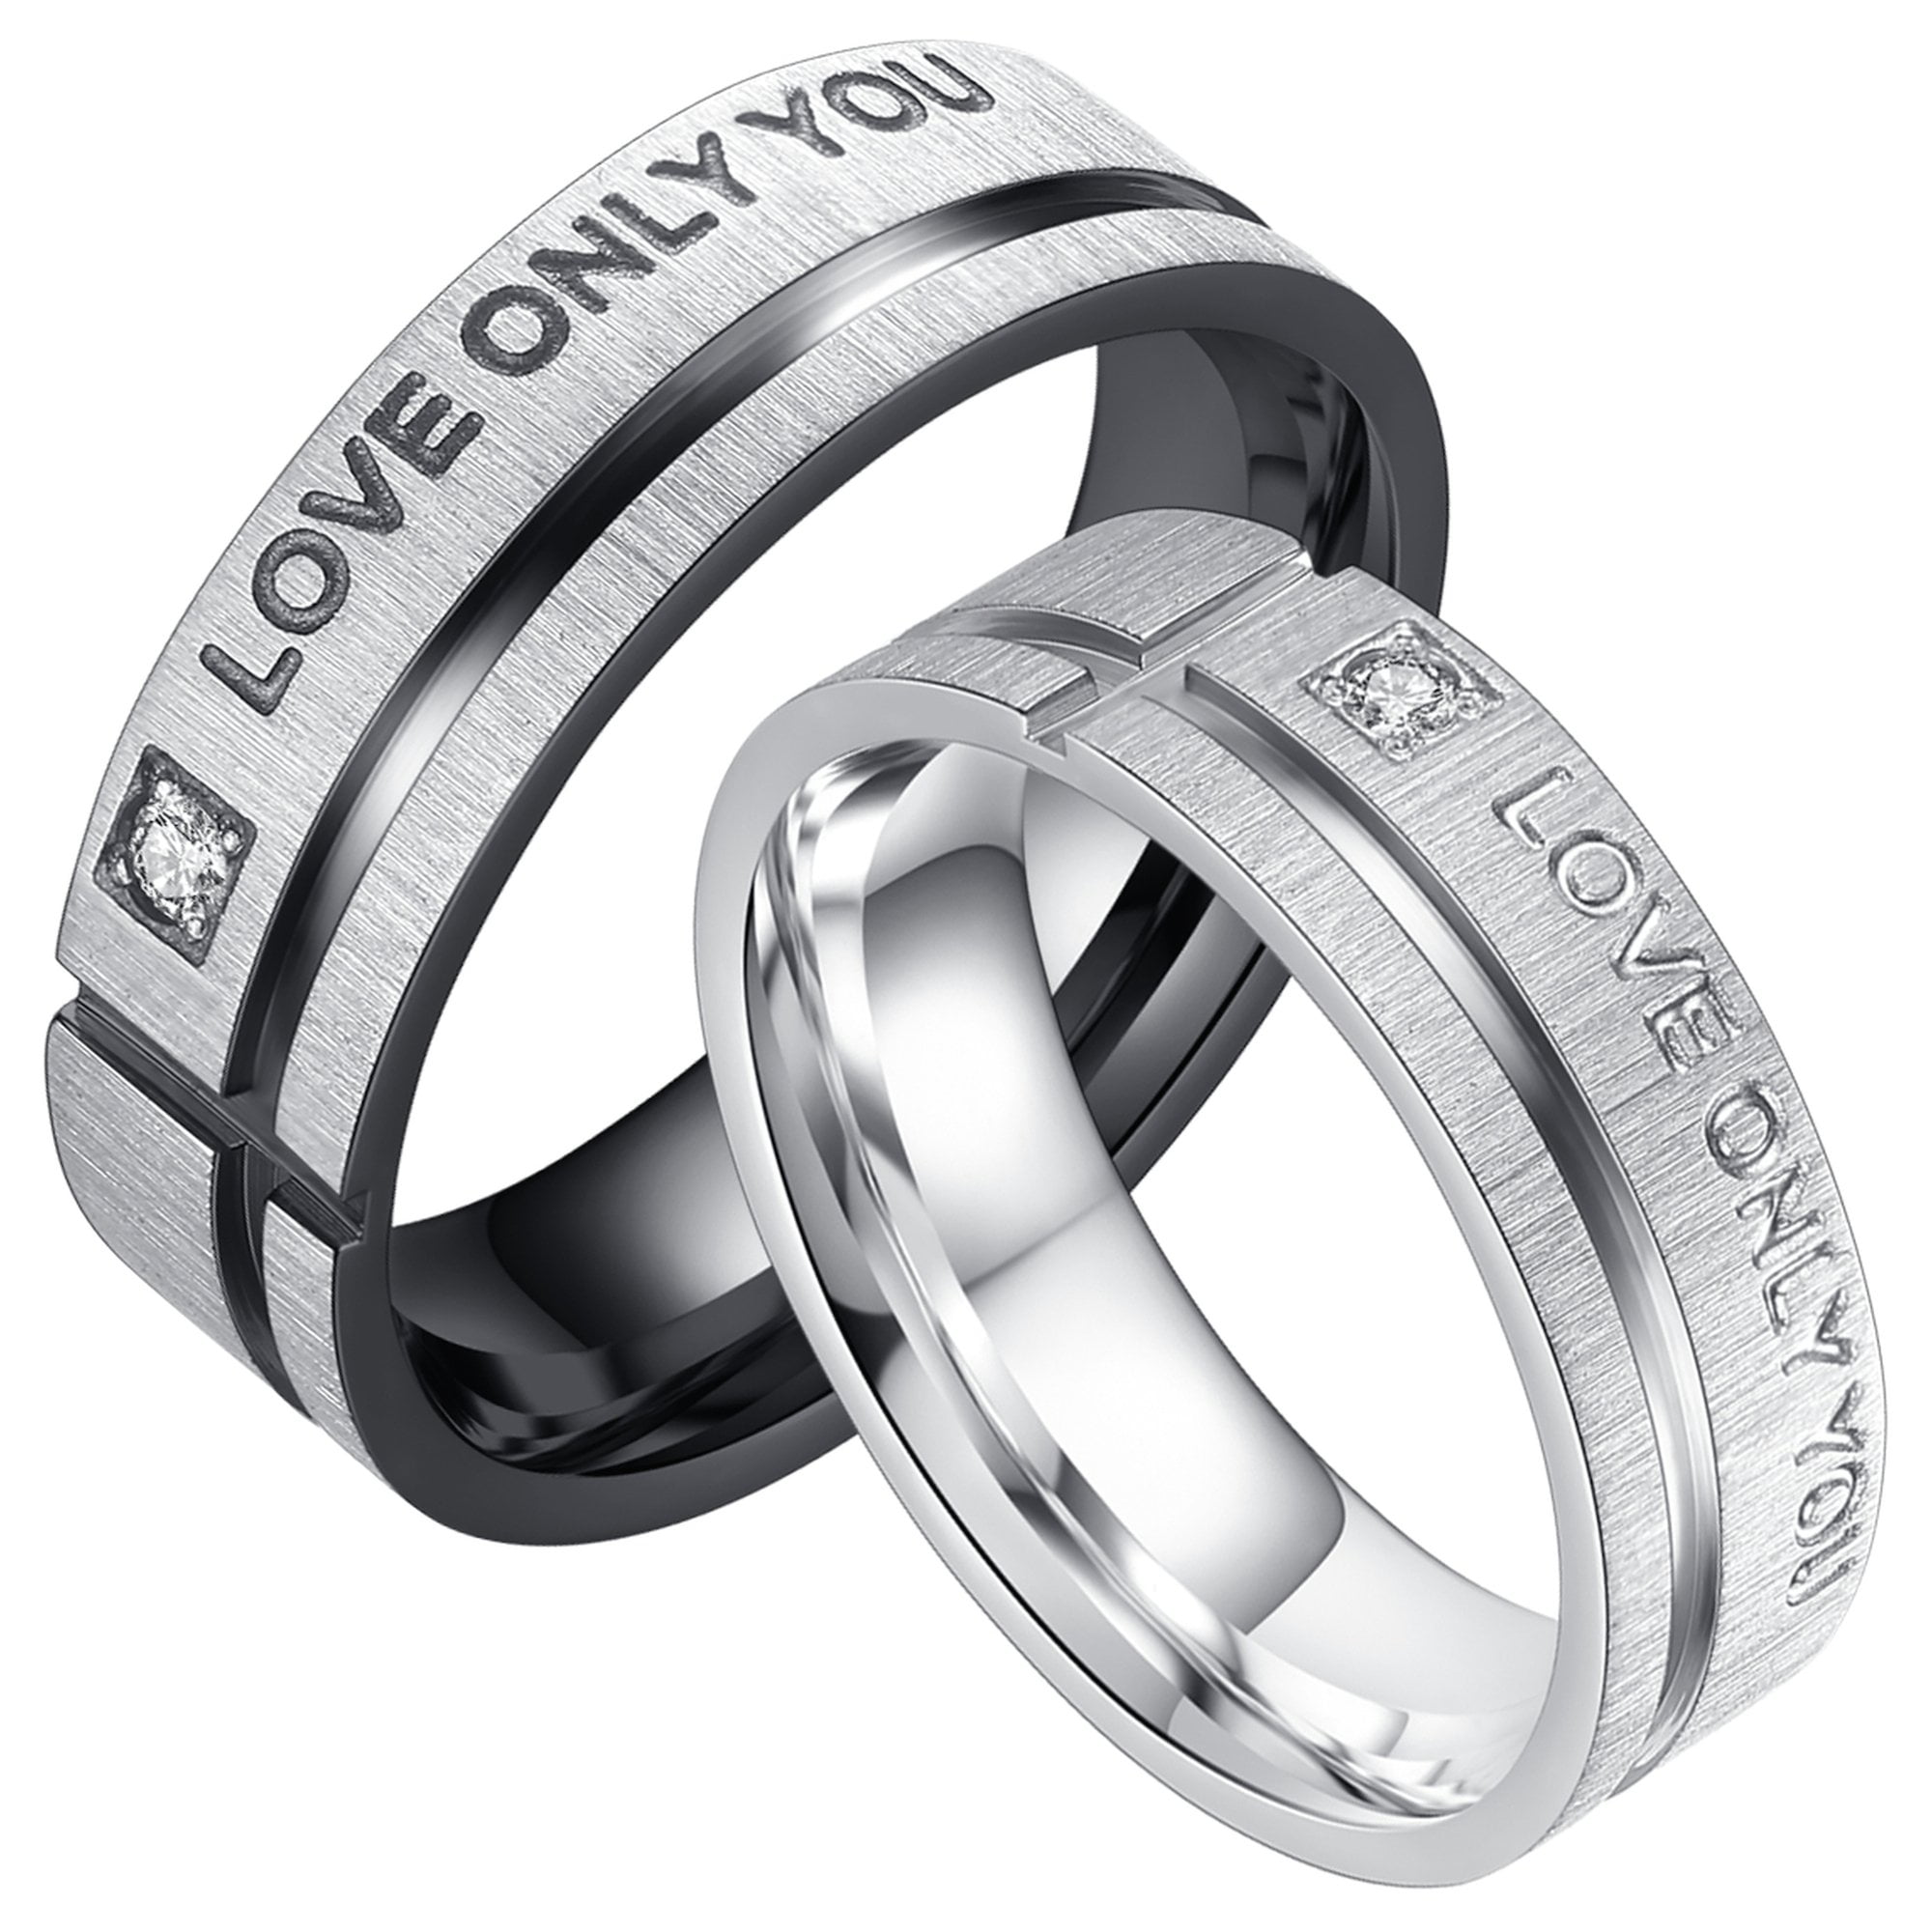 Legacy troon Brandweerman Couple's Promise Ring "Love Only You" His and Her Matching Wedding Band in  Stainless Steel, for Men and Women - Walmart.com